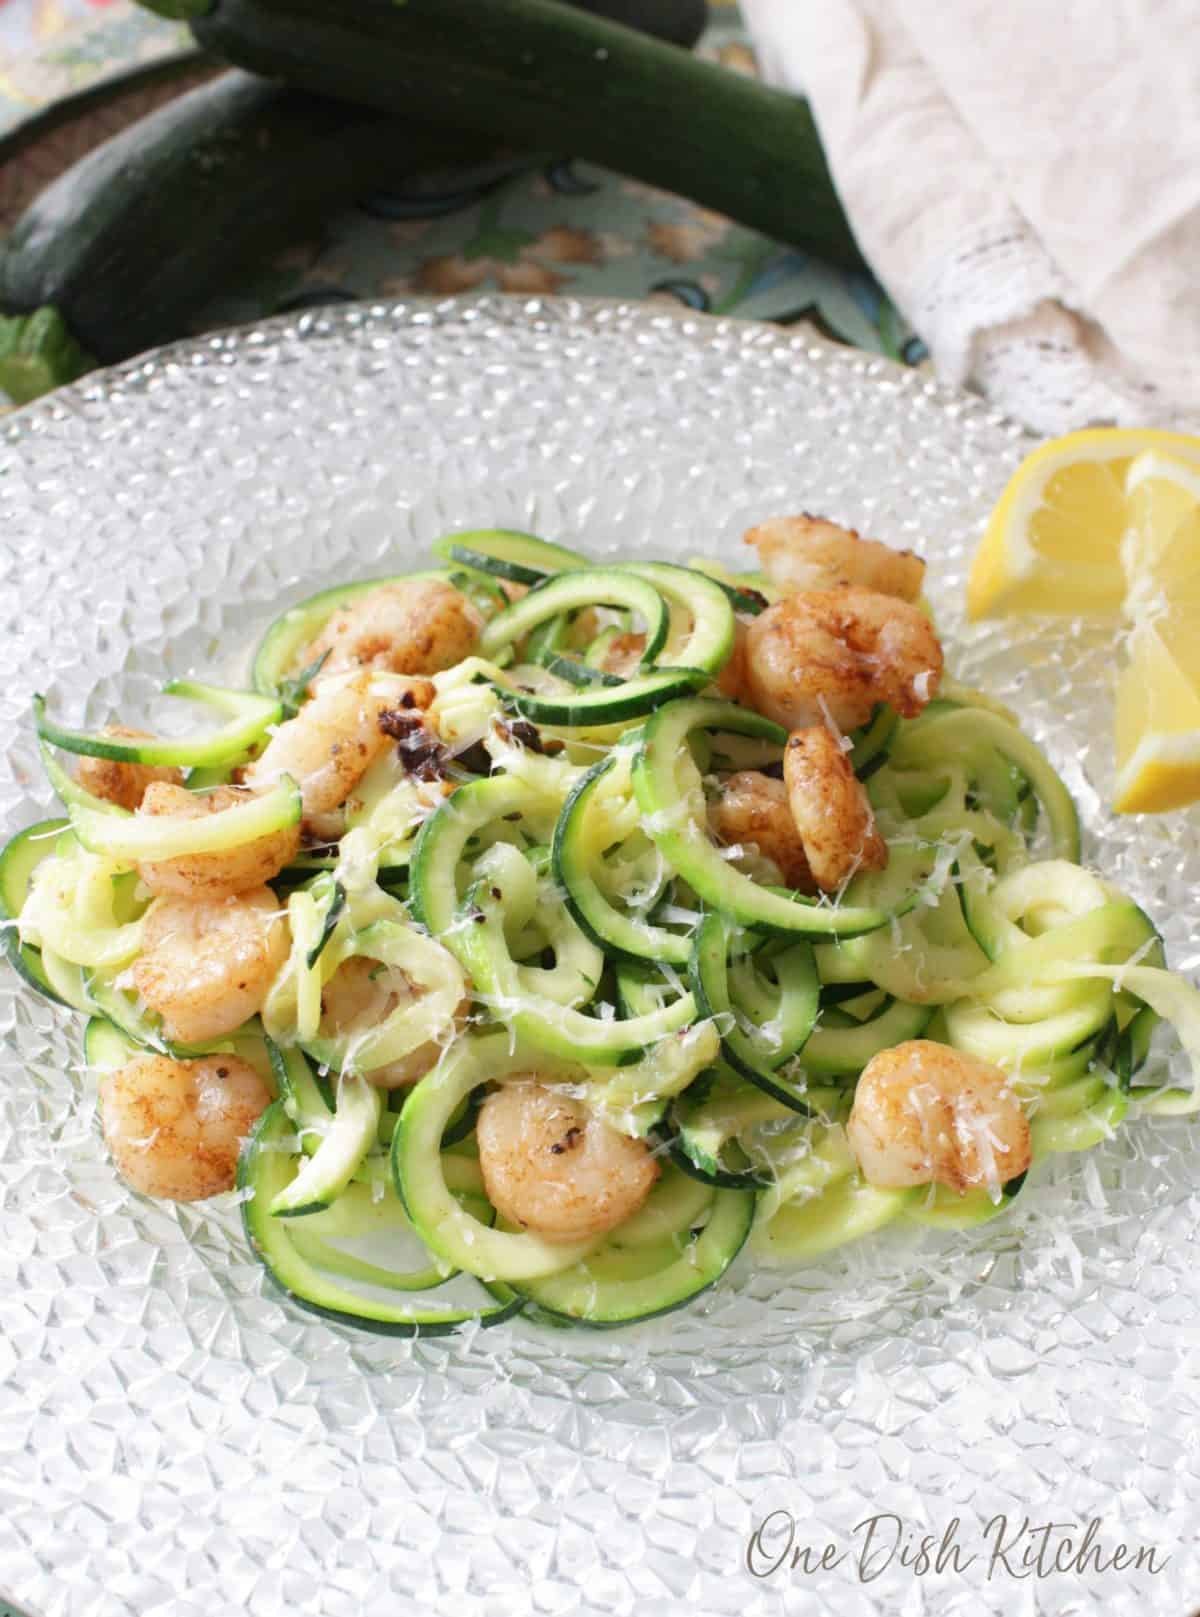 Zucchini noodles topped with grilled shrimp and parmesan cheese on a plate with lemon slices